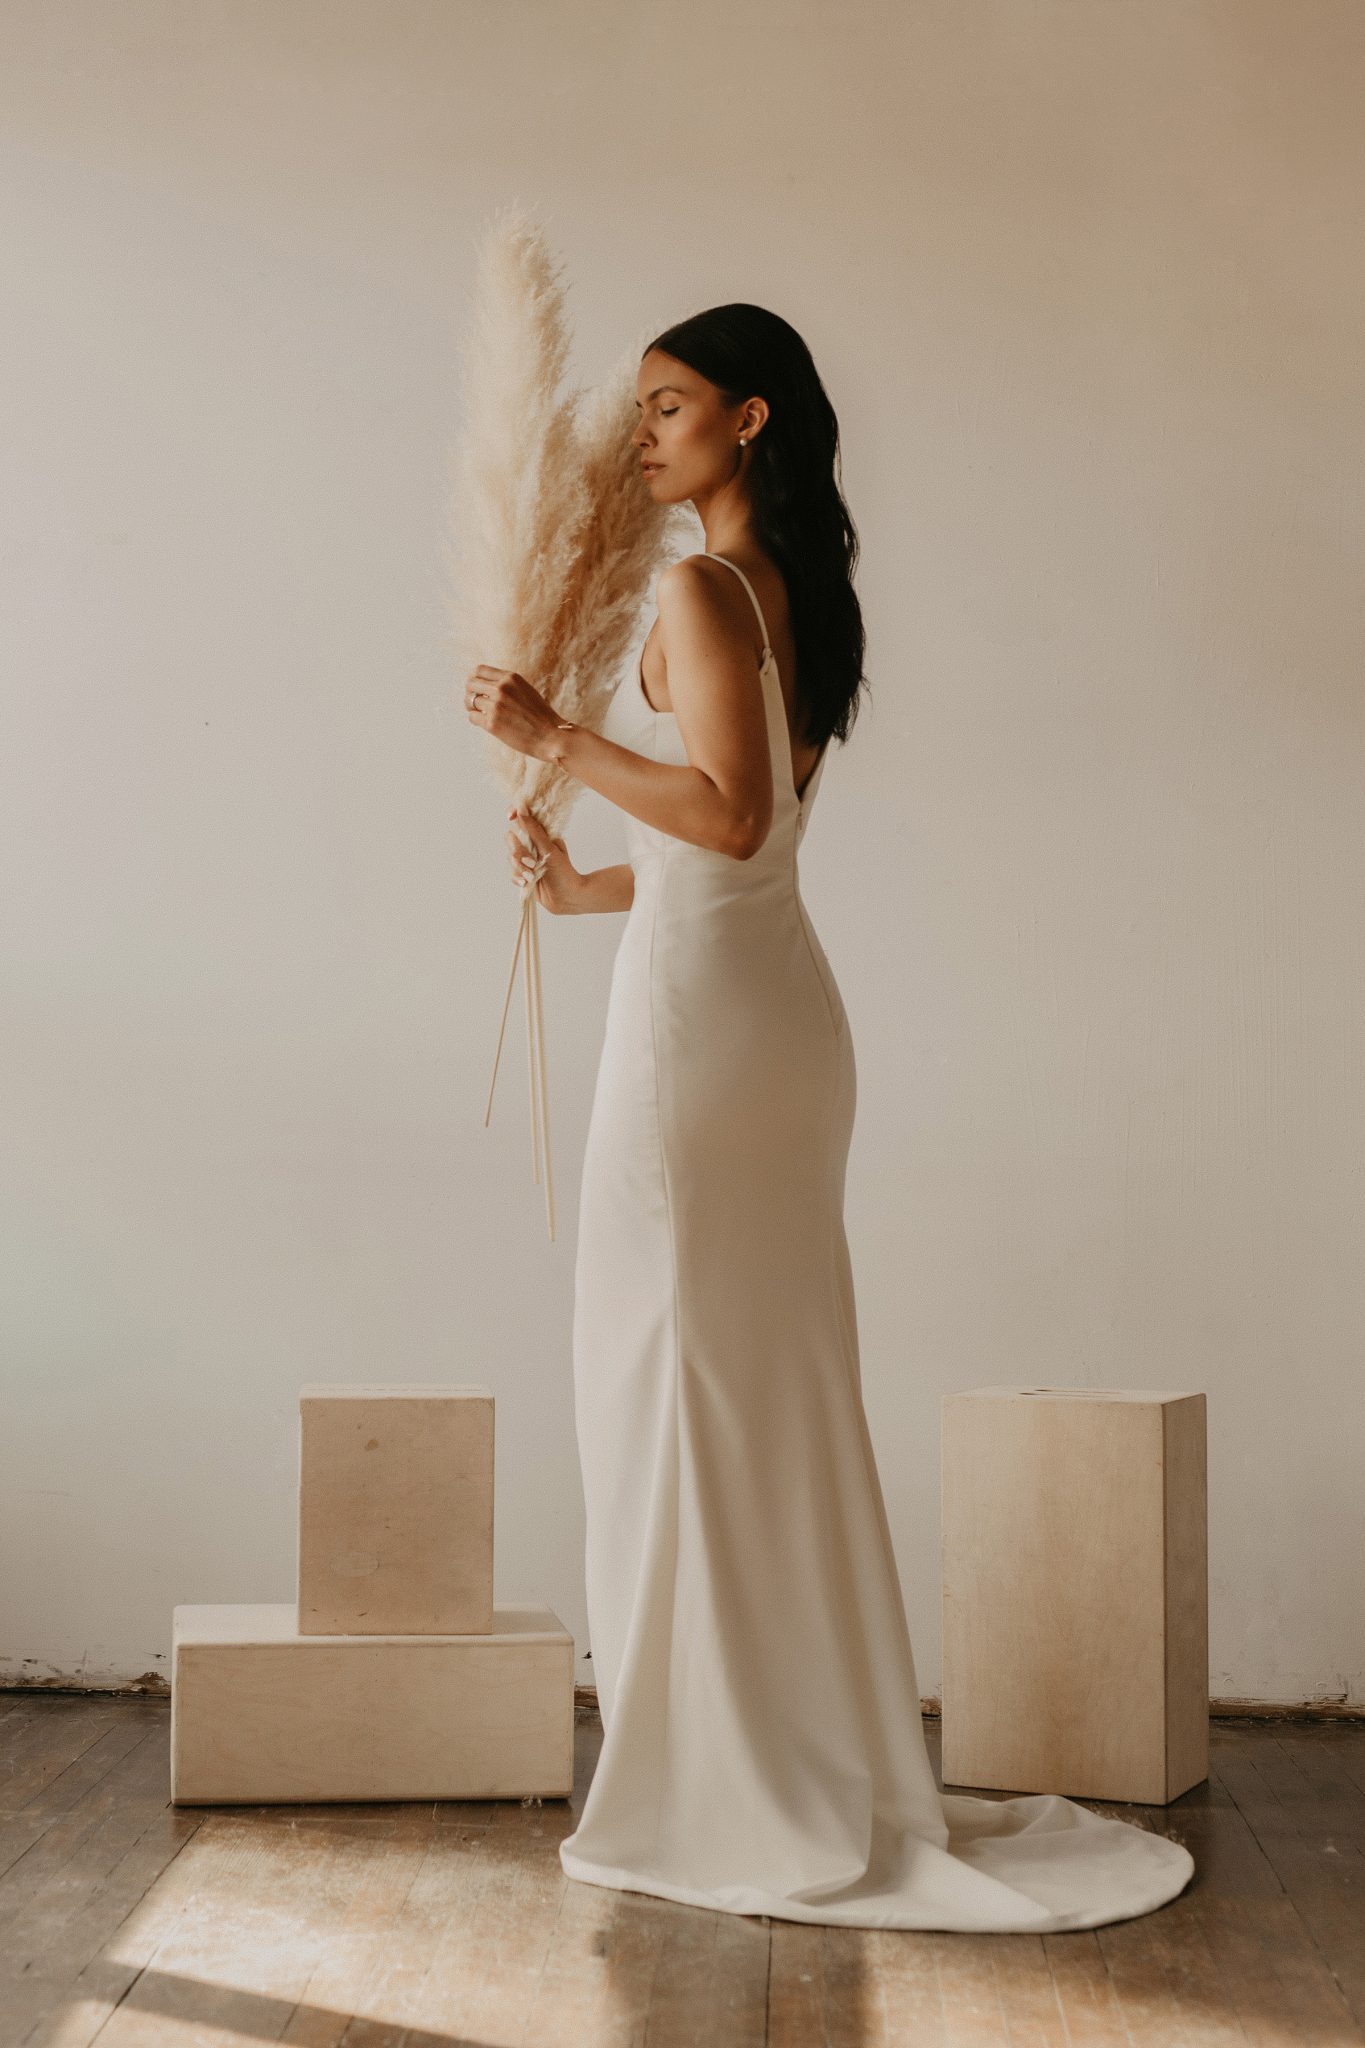 Bridal Minimalism Feature on Bronte Bride: Delica Bridal Shares All About New Bridal Trends & Dress Shopping During Covid, wedding dress shopping, boho bridal portraits